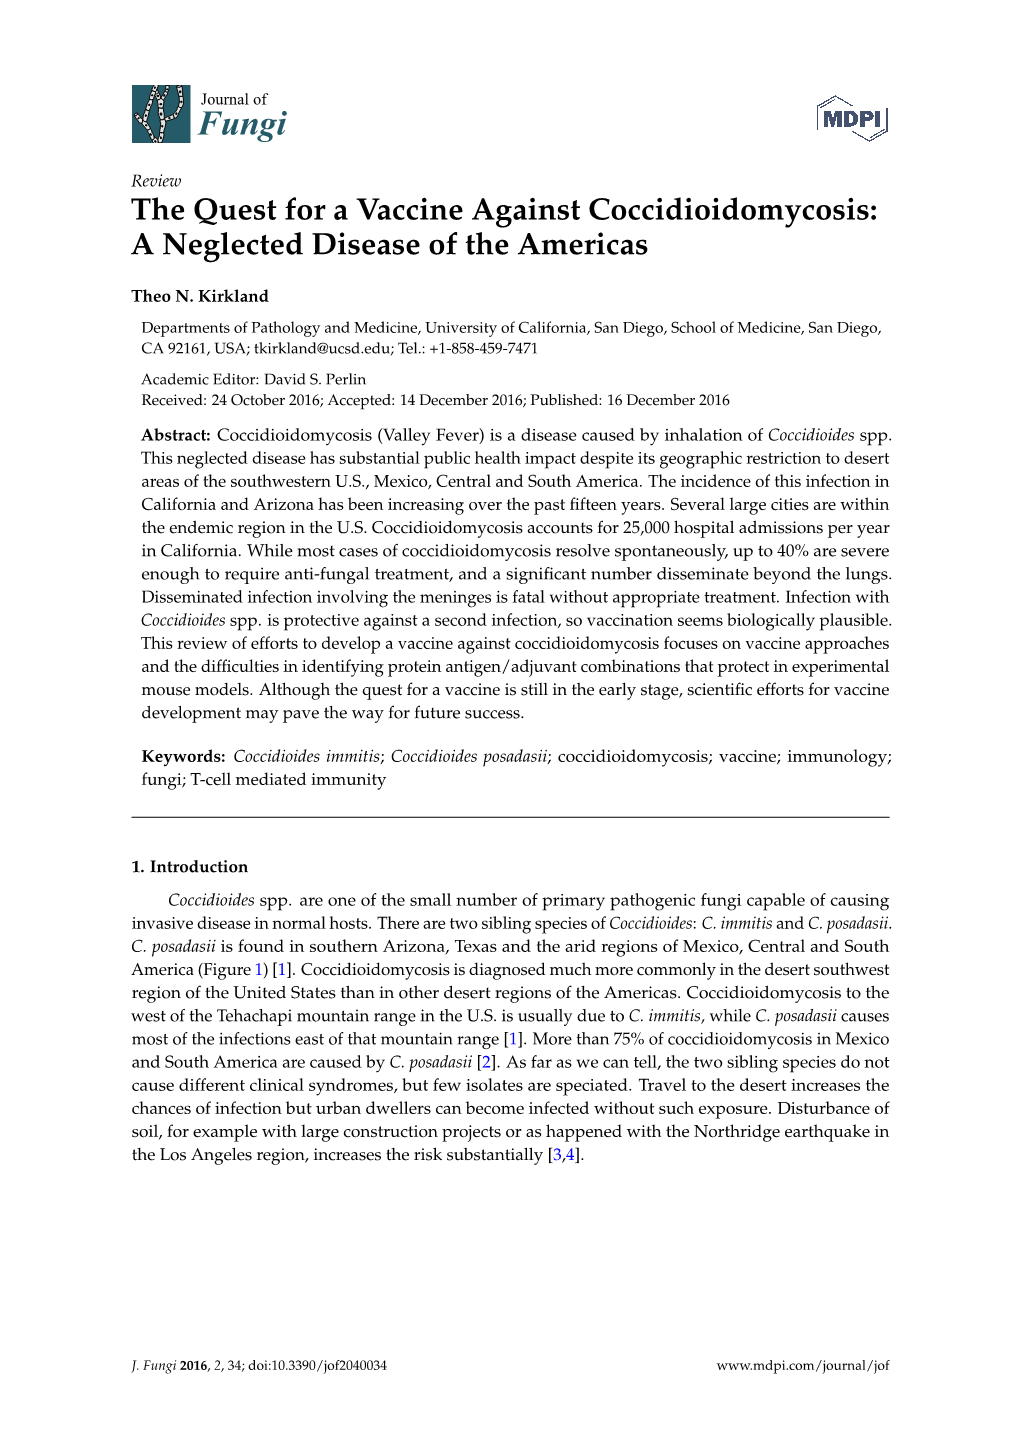 The Quest for a Vaccine Against Coccidioidomycosis: a Neglected Disease of the Americas